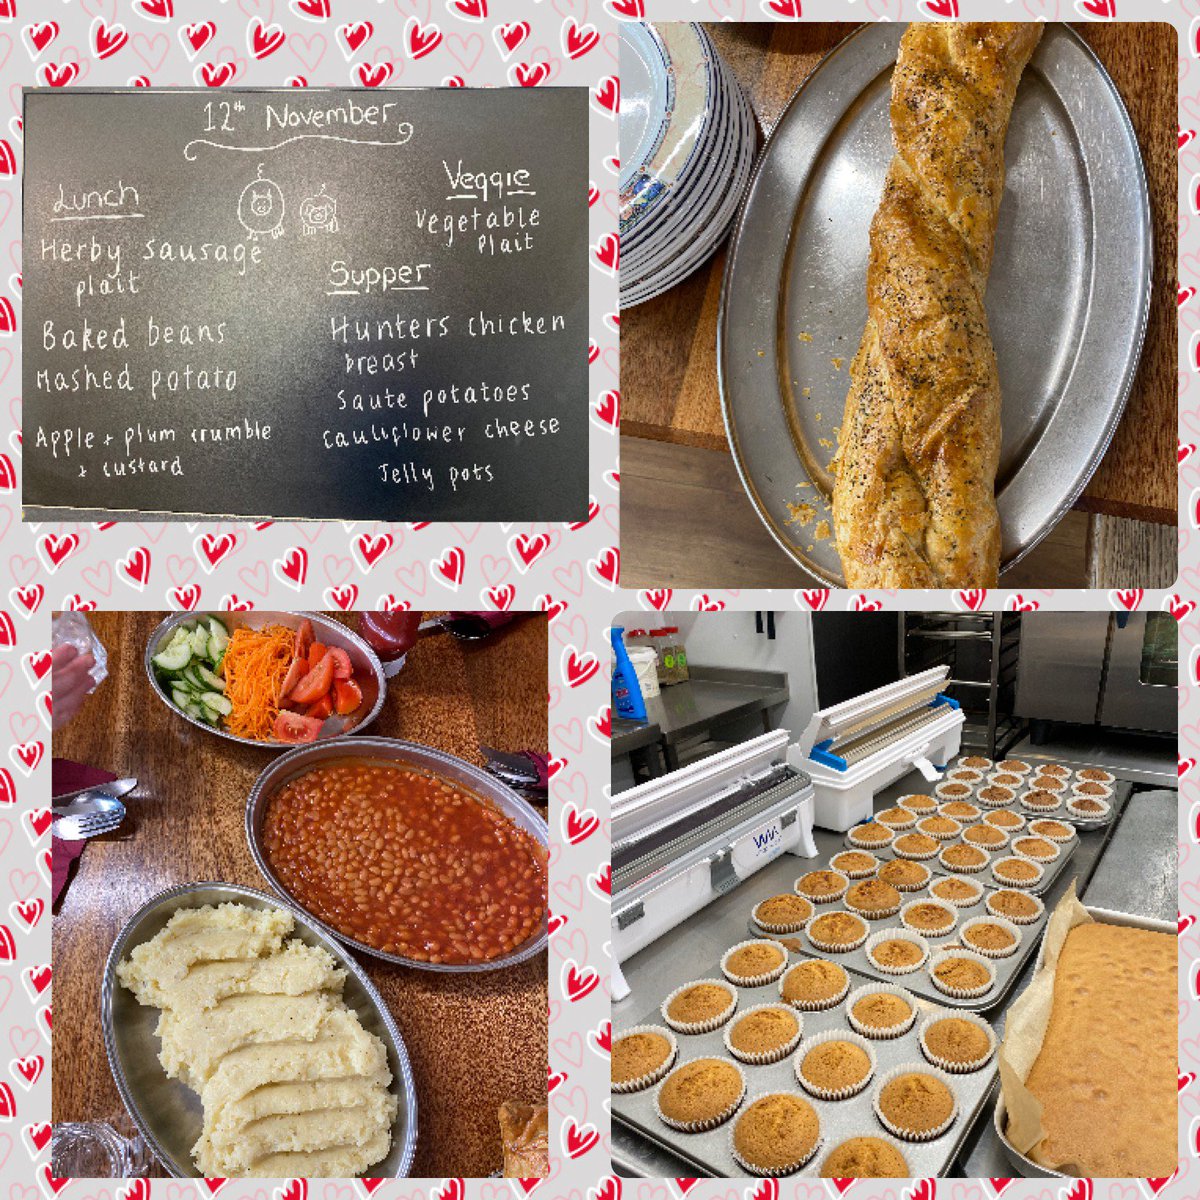 For @NSMW we had our favourite! Sausage Plait and Crumble and there was not a crumb left 😋 YUM 
@TheElmsSchool #NationalSchoolMealsWeek